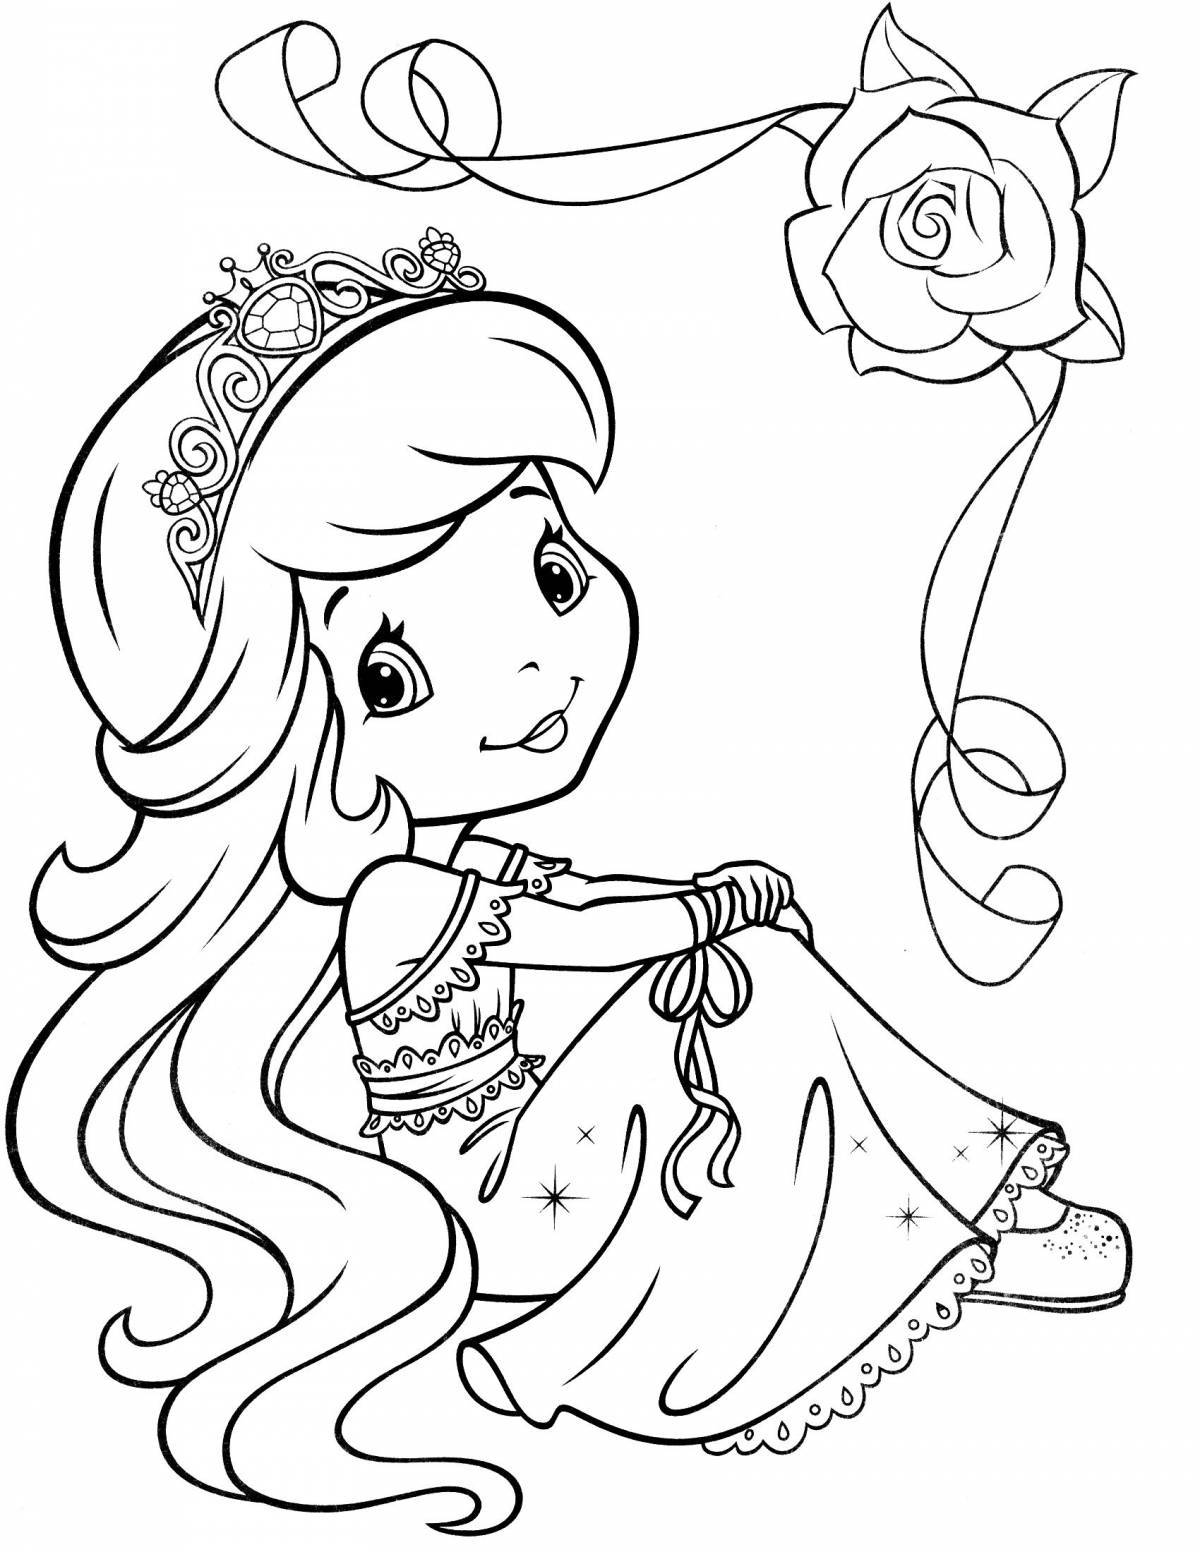 Creative coloring book for girls 6 years old